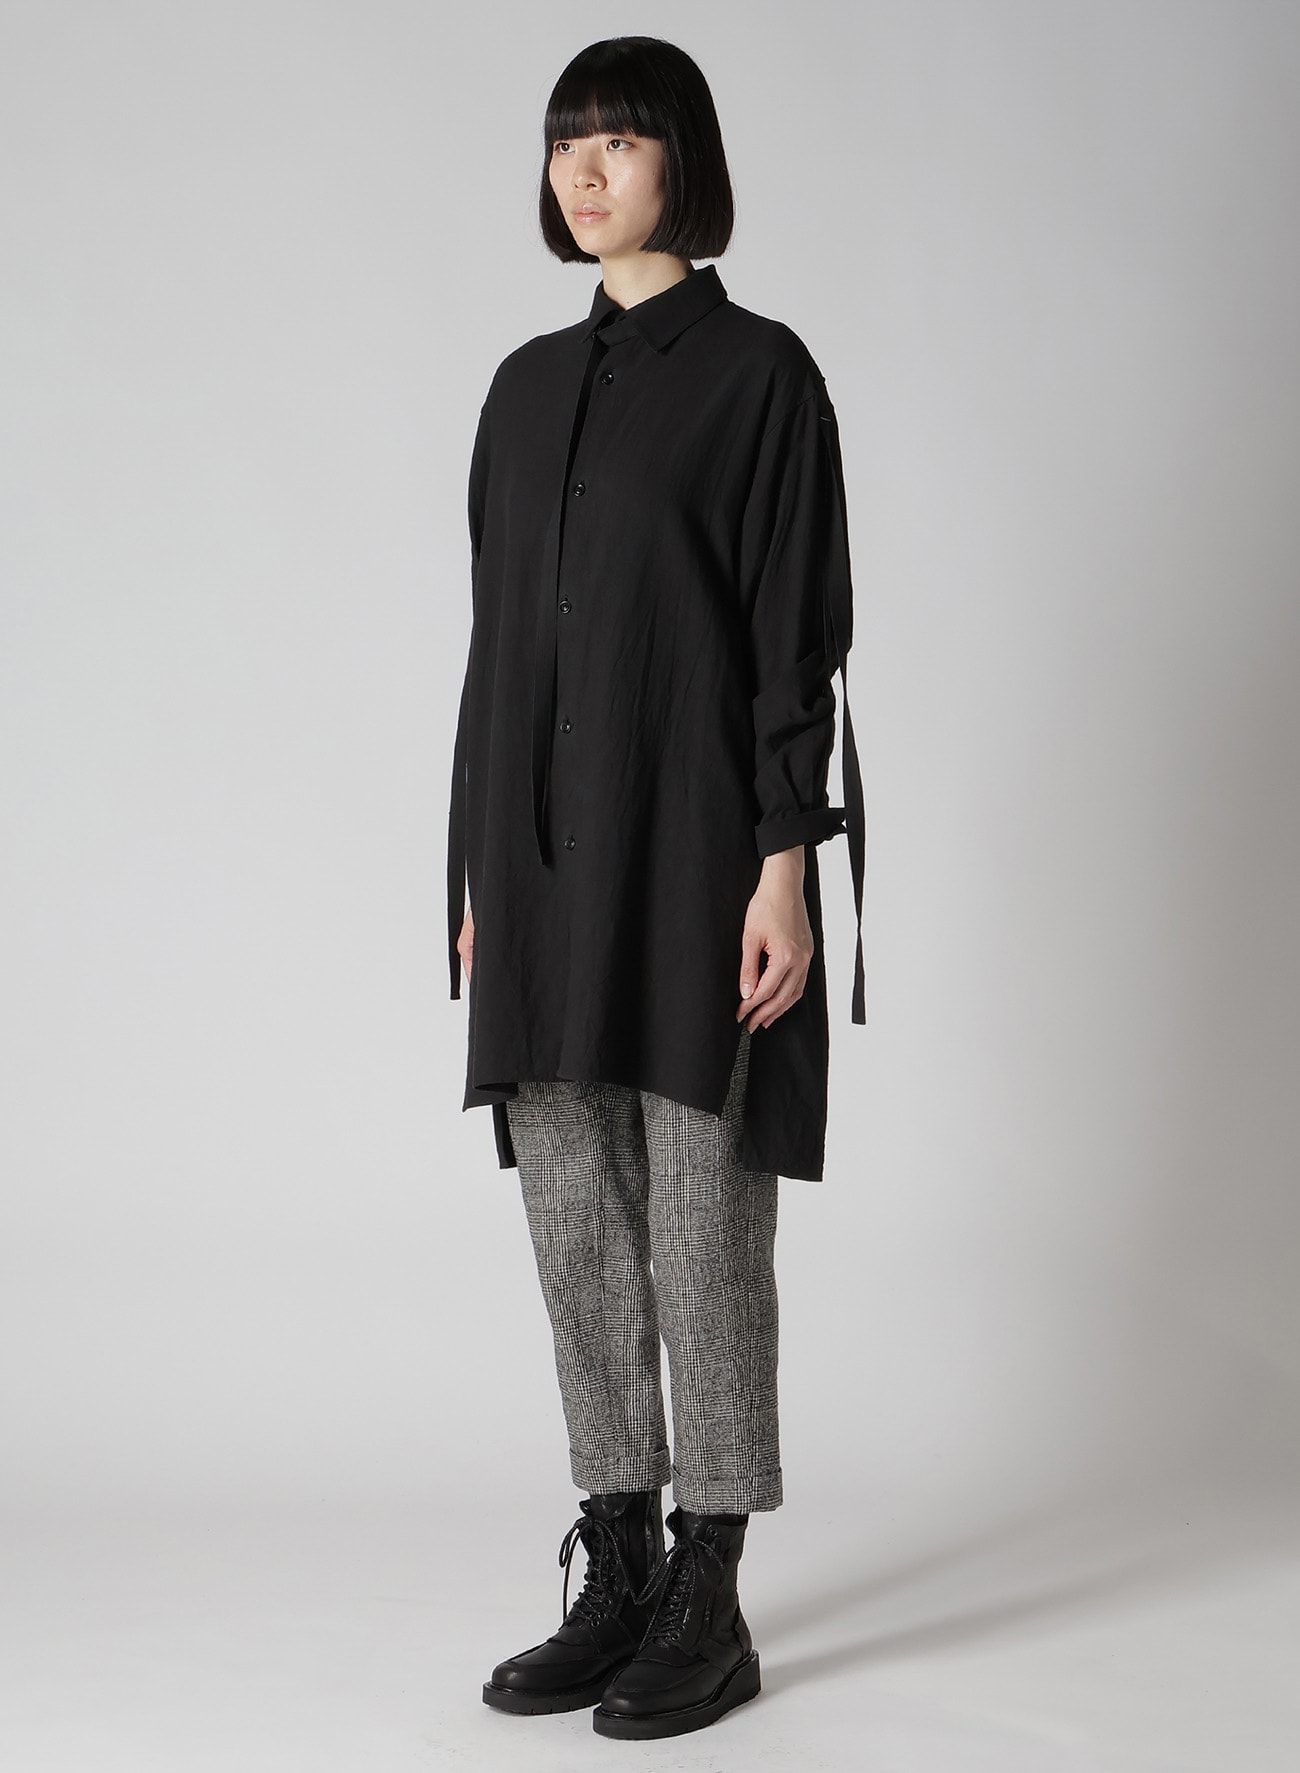 【8/2 12:00(JST) Release】TWILL GARMENT WASH COLLAR/SLEEVE OPEN TAB BLOUSE